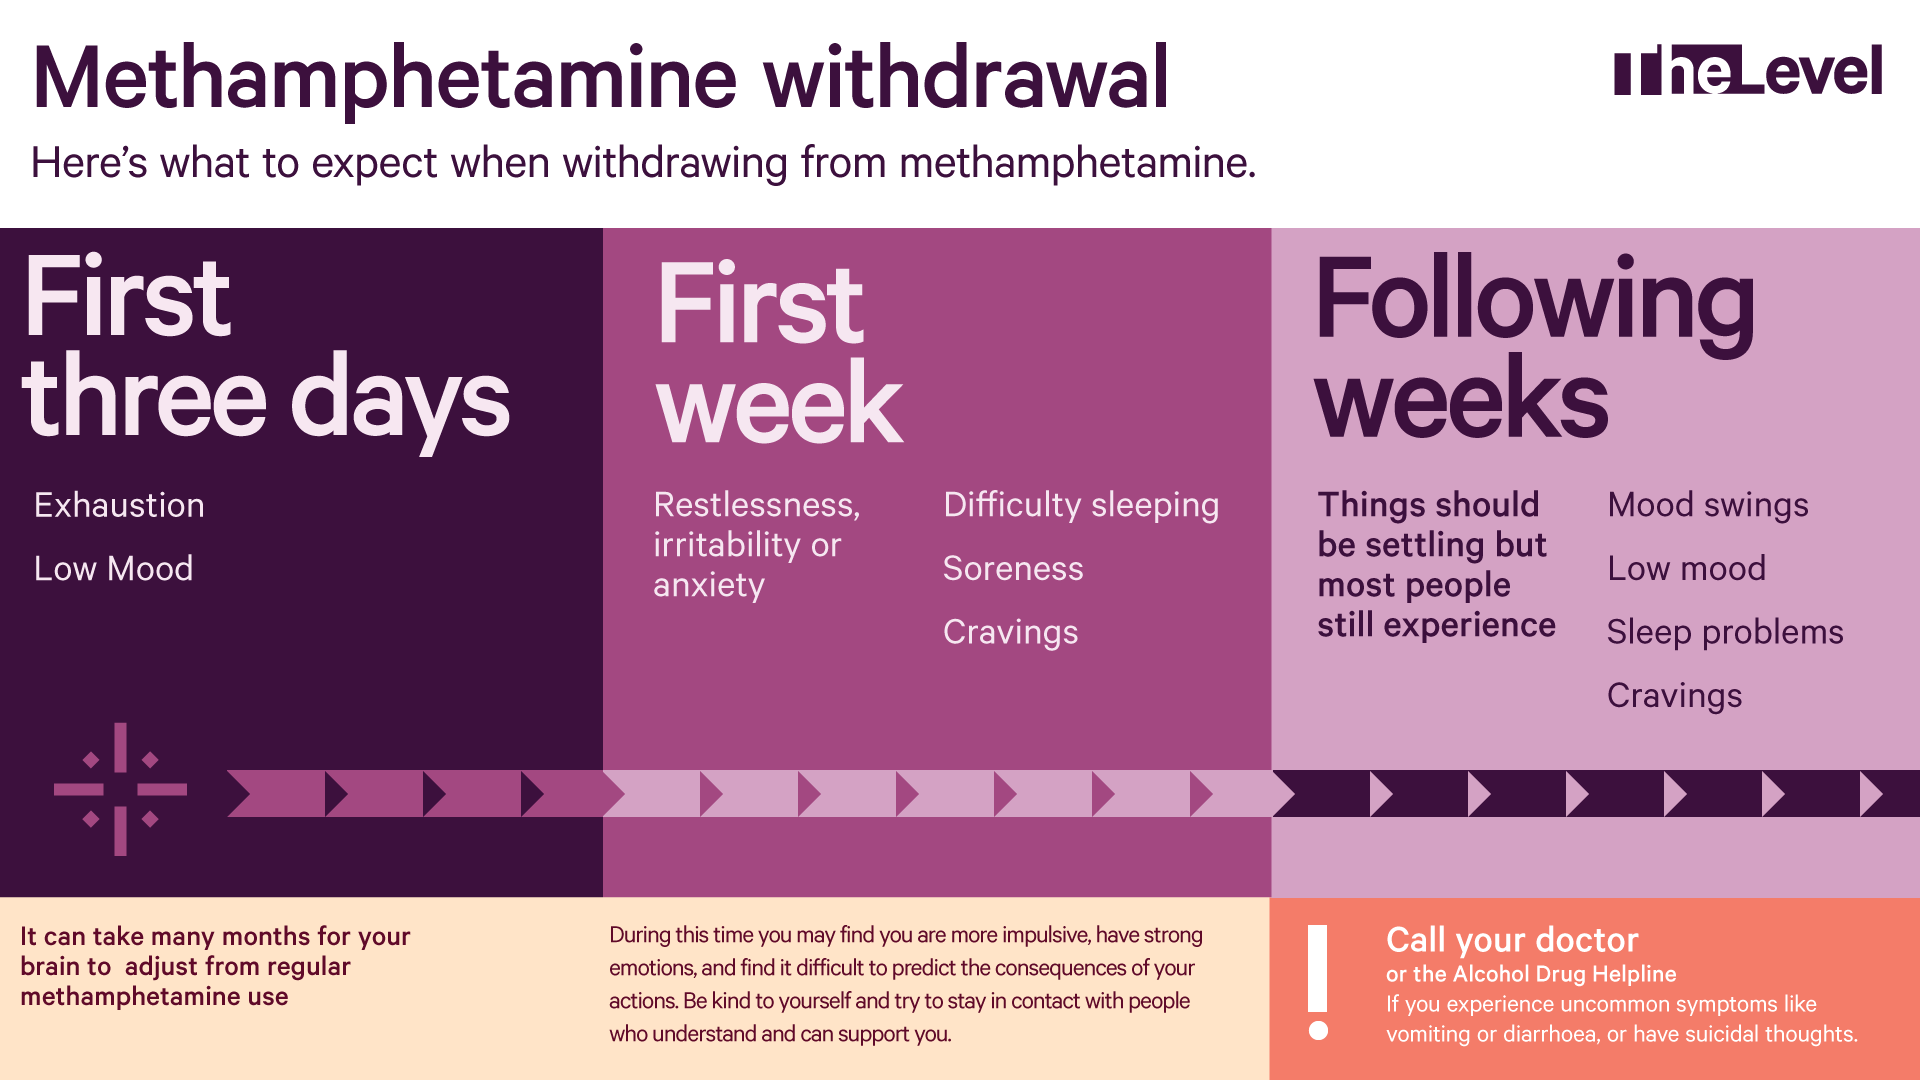 Methamphetamine withdrawal. Here's what to expect when withdrawing from meth. The first three days you can experience exhaustion and low mood. The First week you can experience restlessness, irritability, anxiety, difficulty sleeping, soreness and cravings. The following weeks you can experience mood swings, low mood, sleep problems and cravings. Things should be settling at this point. Note that it can take many months for your brain to adjust from regular meth use. During the first week you may find that you are more impulsive, have strong emotions and find it difficult to predict the consequences of your actions. Be kind to yourself and try to stay in contact with people who understand and can support you. Remember to call your doctor or the alcohol drug helpline (0800 787 797) if you experience uncommon symptoms like vomiting, diarrhoea or suicidal thoughts.